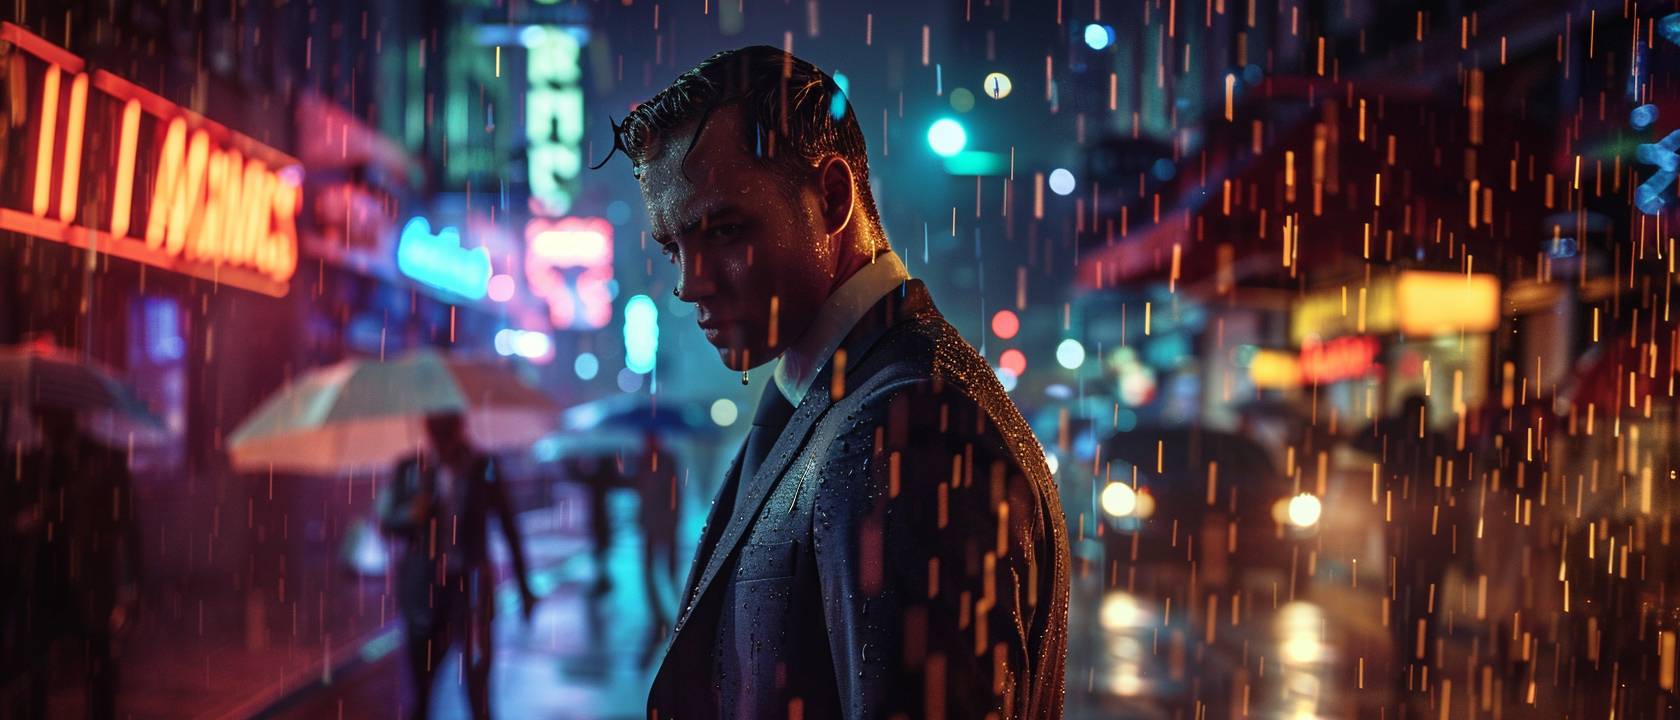 A man in a suit, standing in the rain with a pensive expression, wet hair sticking to his forehead. Downtown district. Night time. Neon signs, passing cars, people holding umbrellas. Medium shot, upper body. Dramatic lighting, raindrops illuminated by city lights, water dripping from his suit. High dynamic range.